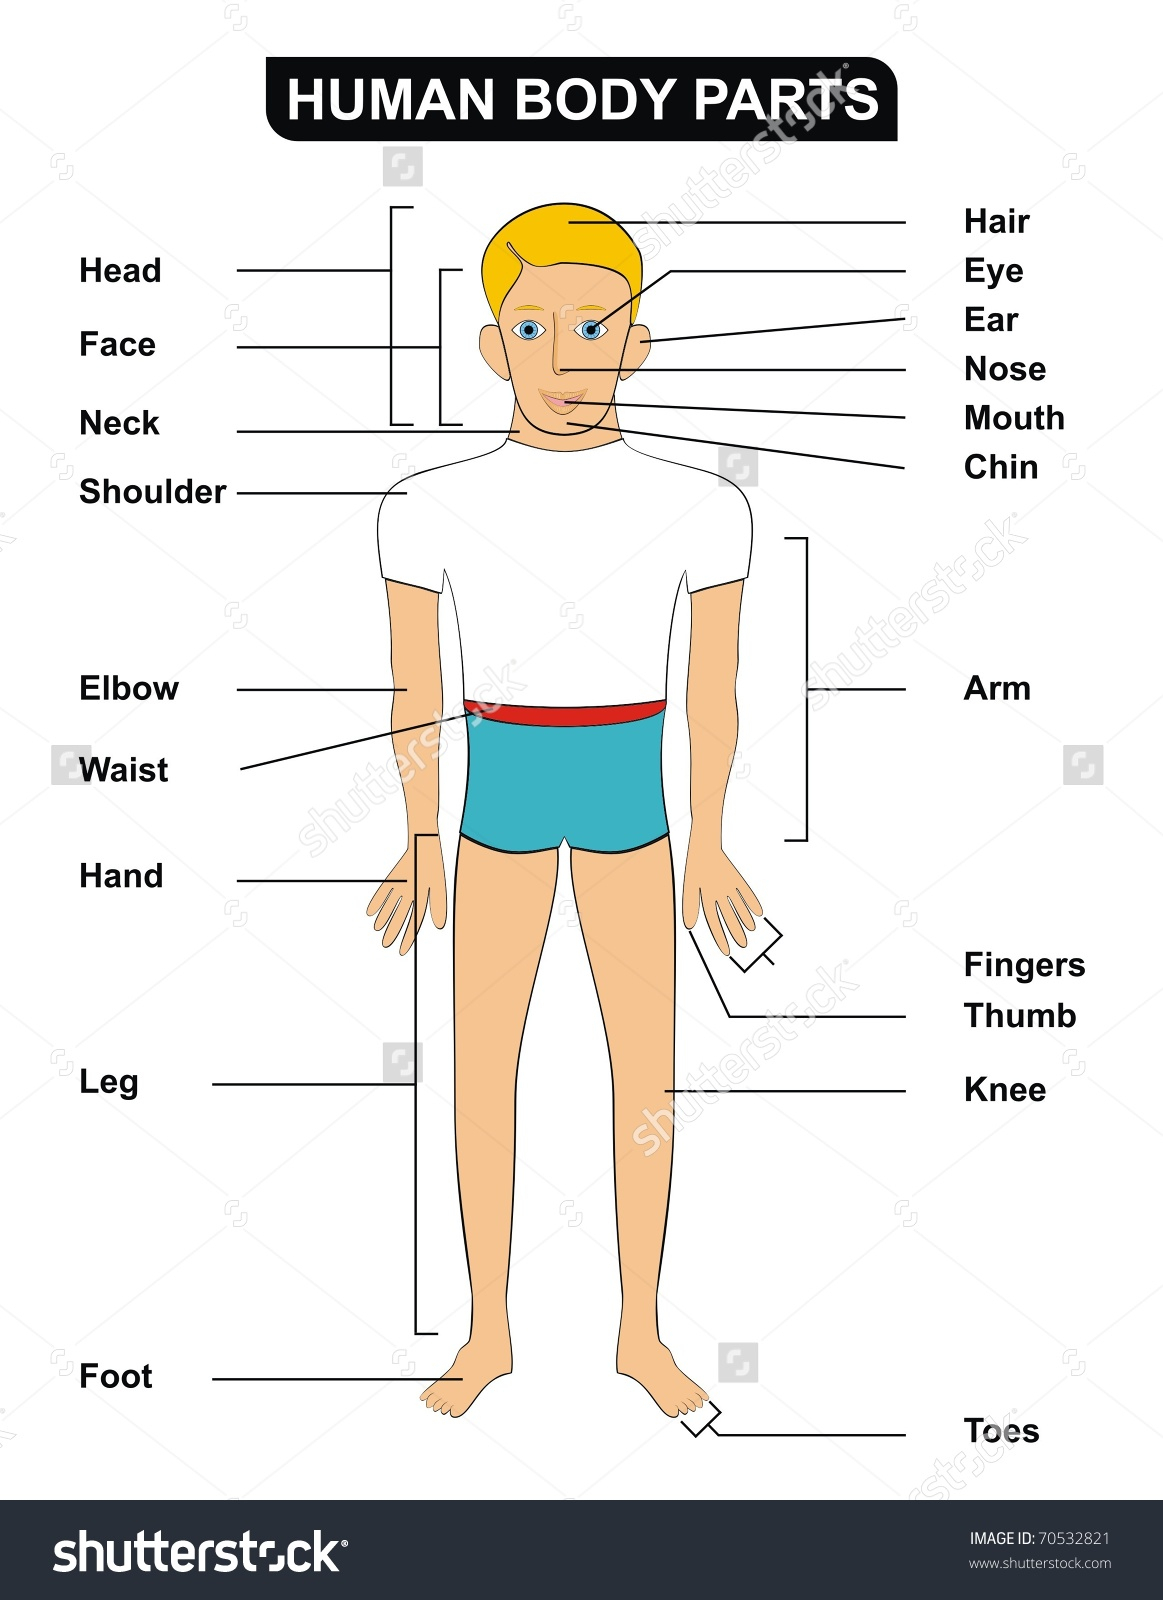 parts of the human body clipart - Clipground blank face diagram 